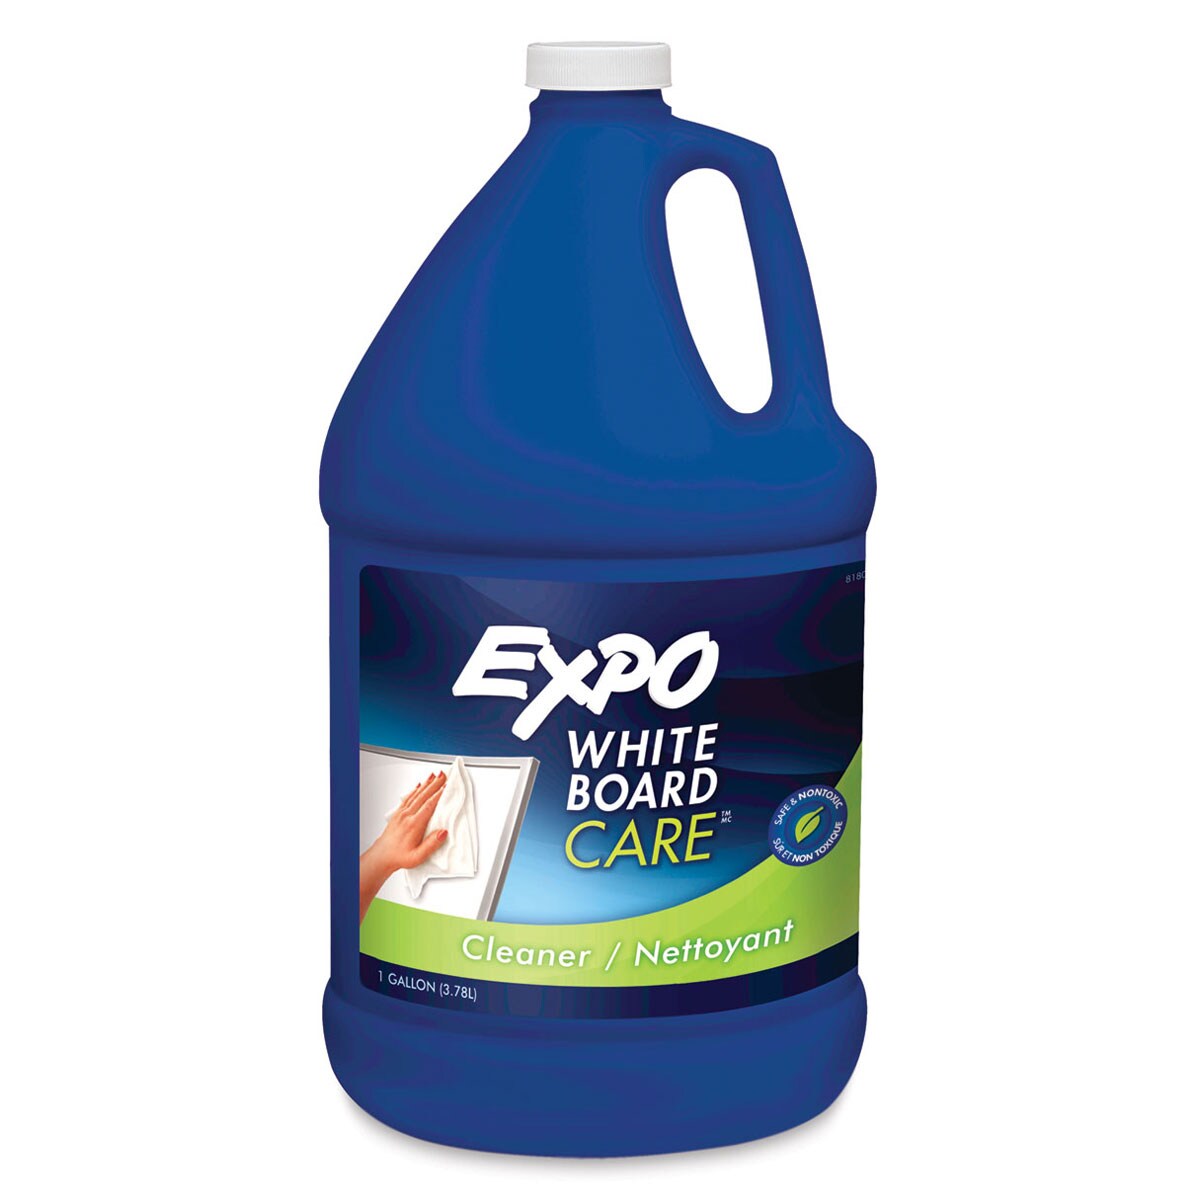 Expo Whiteboard Cleaner - 1 Gallon